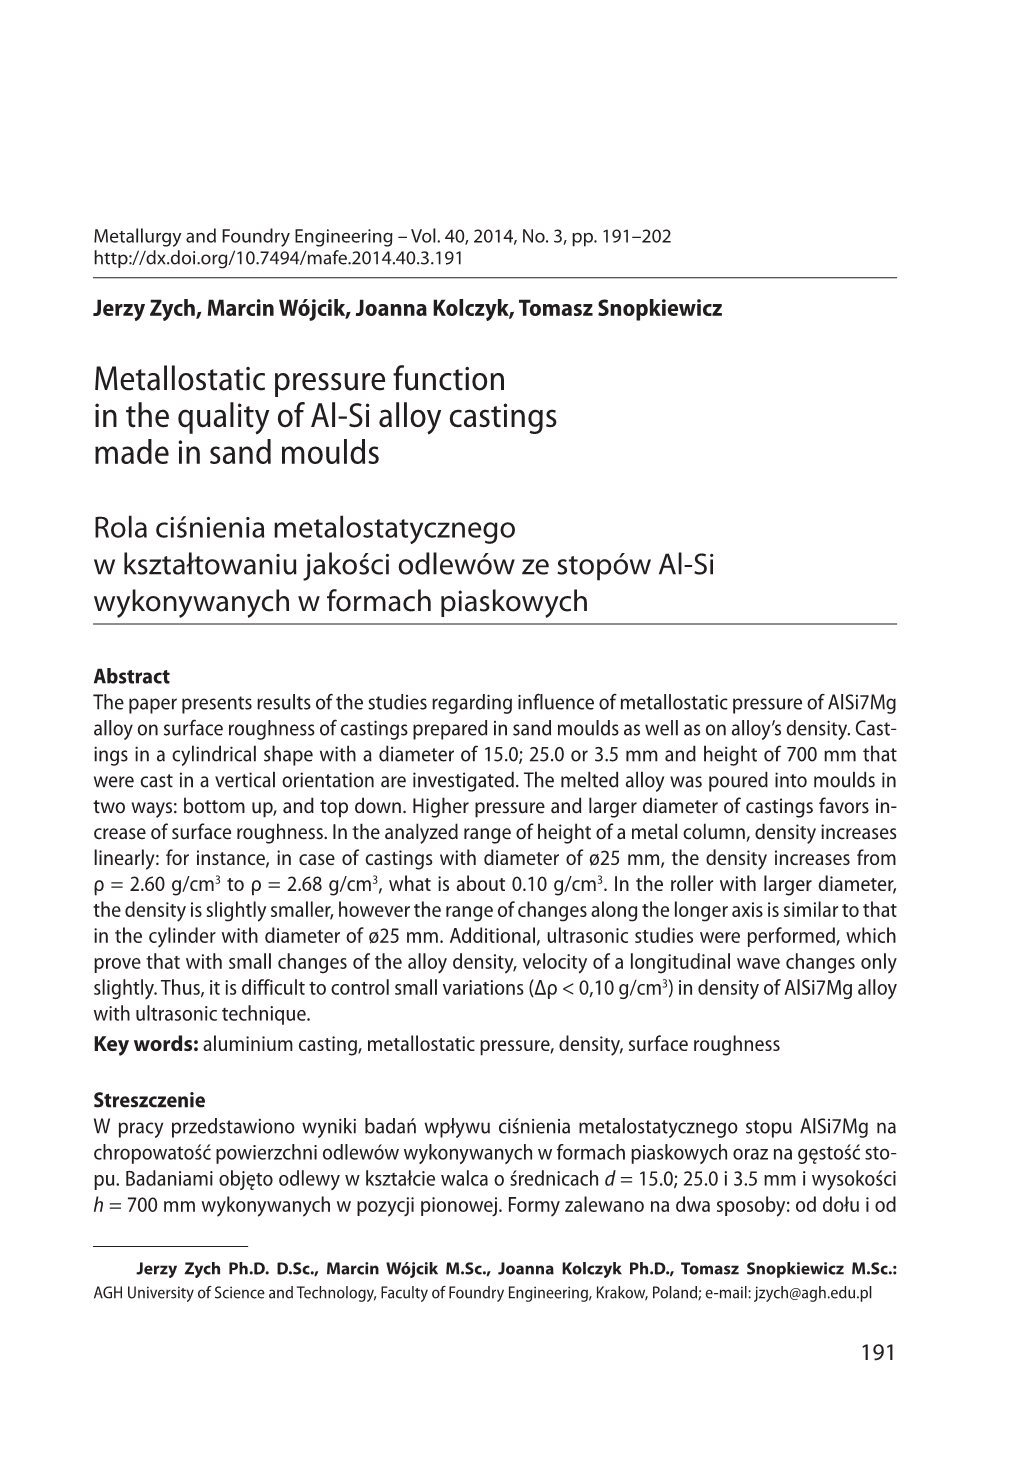 Metallostatic Pressure Function in the Quality of Al-Si Alloy Castings Made in Sand Moulds